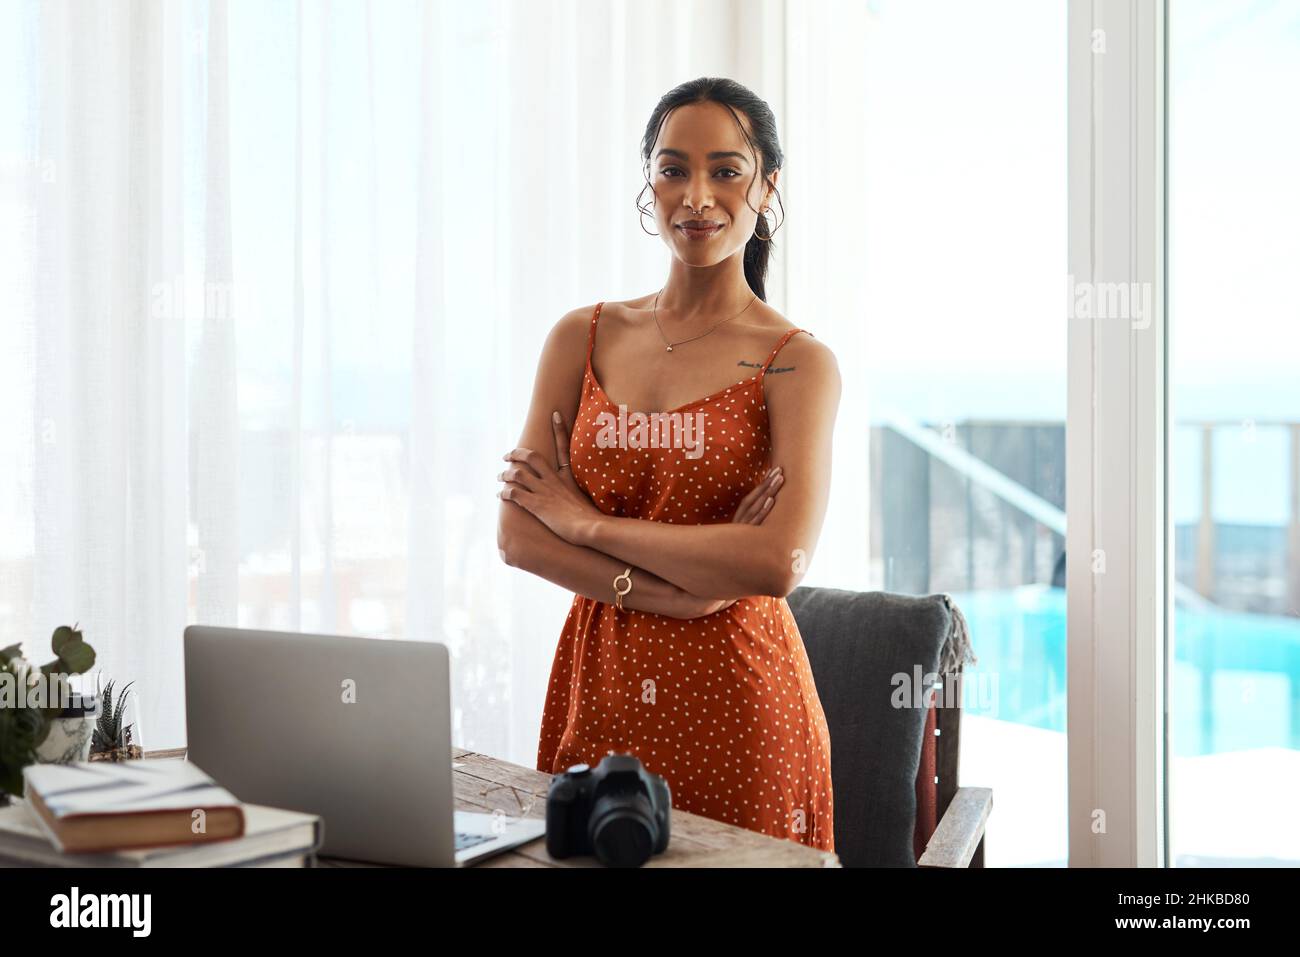 I am destined for success. Cropped portrait of an attractive young businesswoman standing with her arms crossed in her home office. Stock Photo